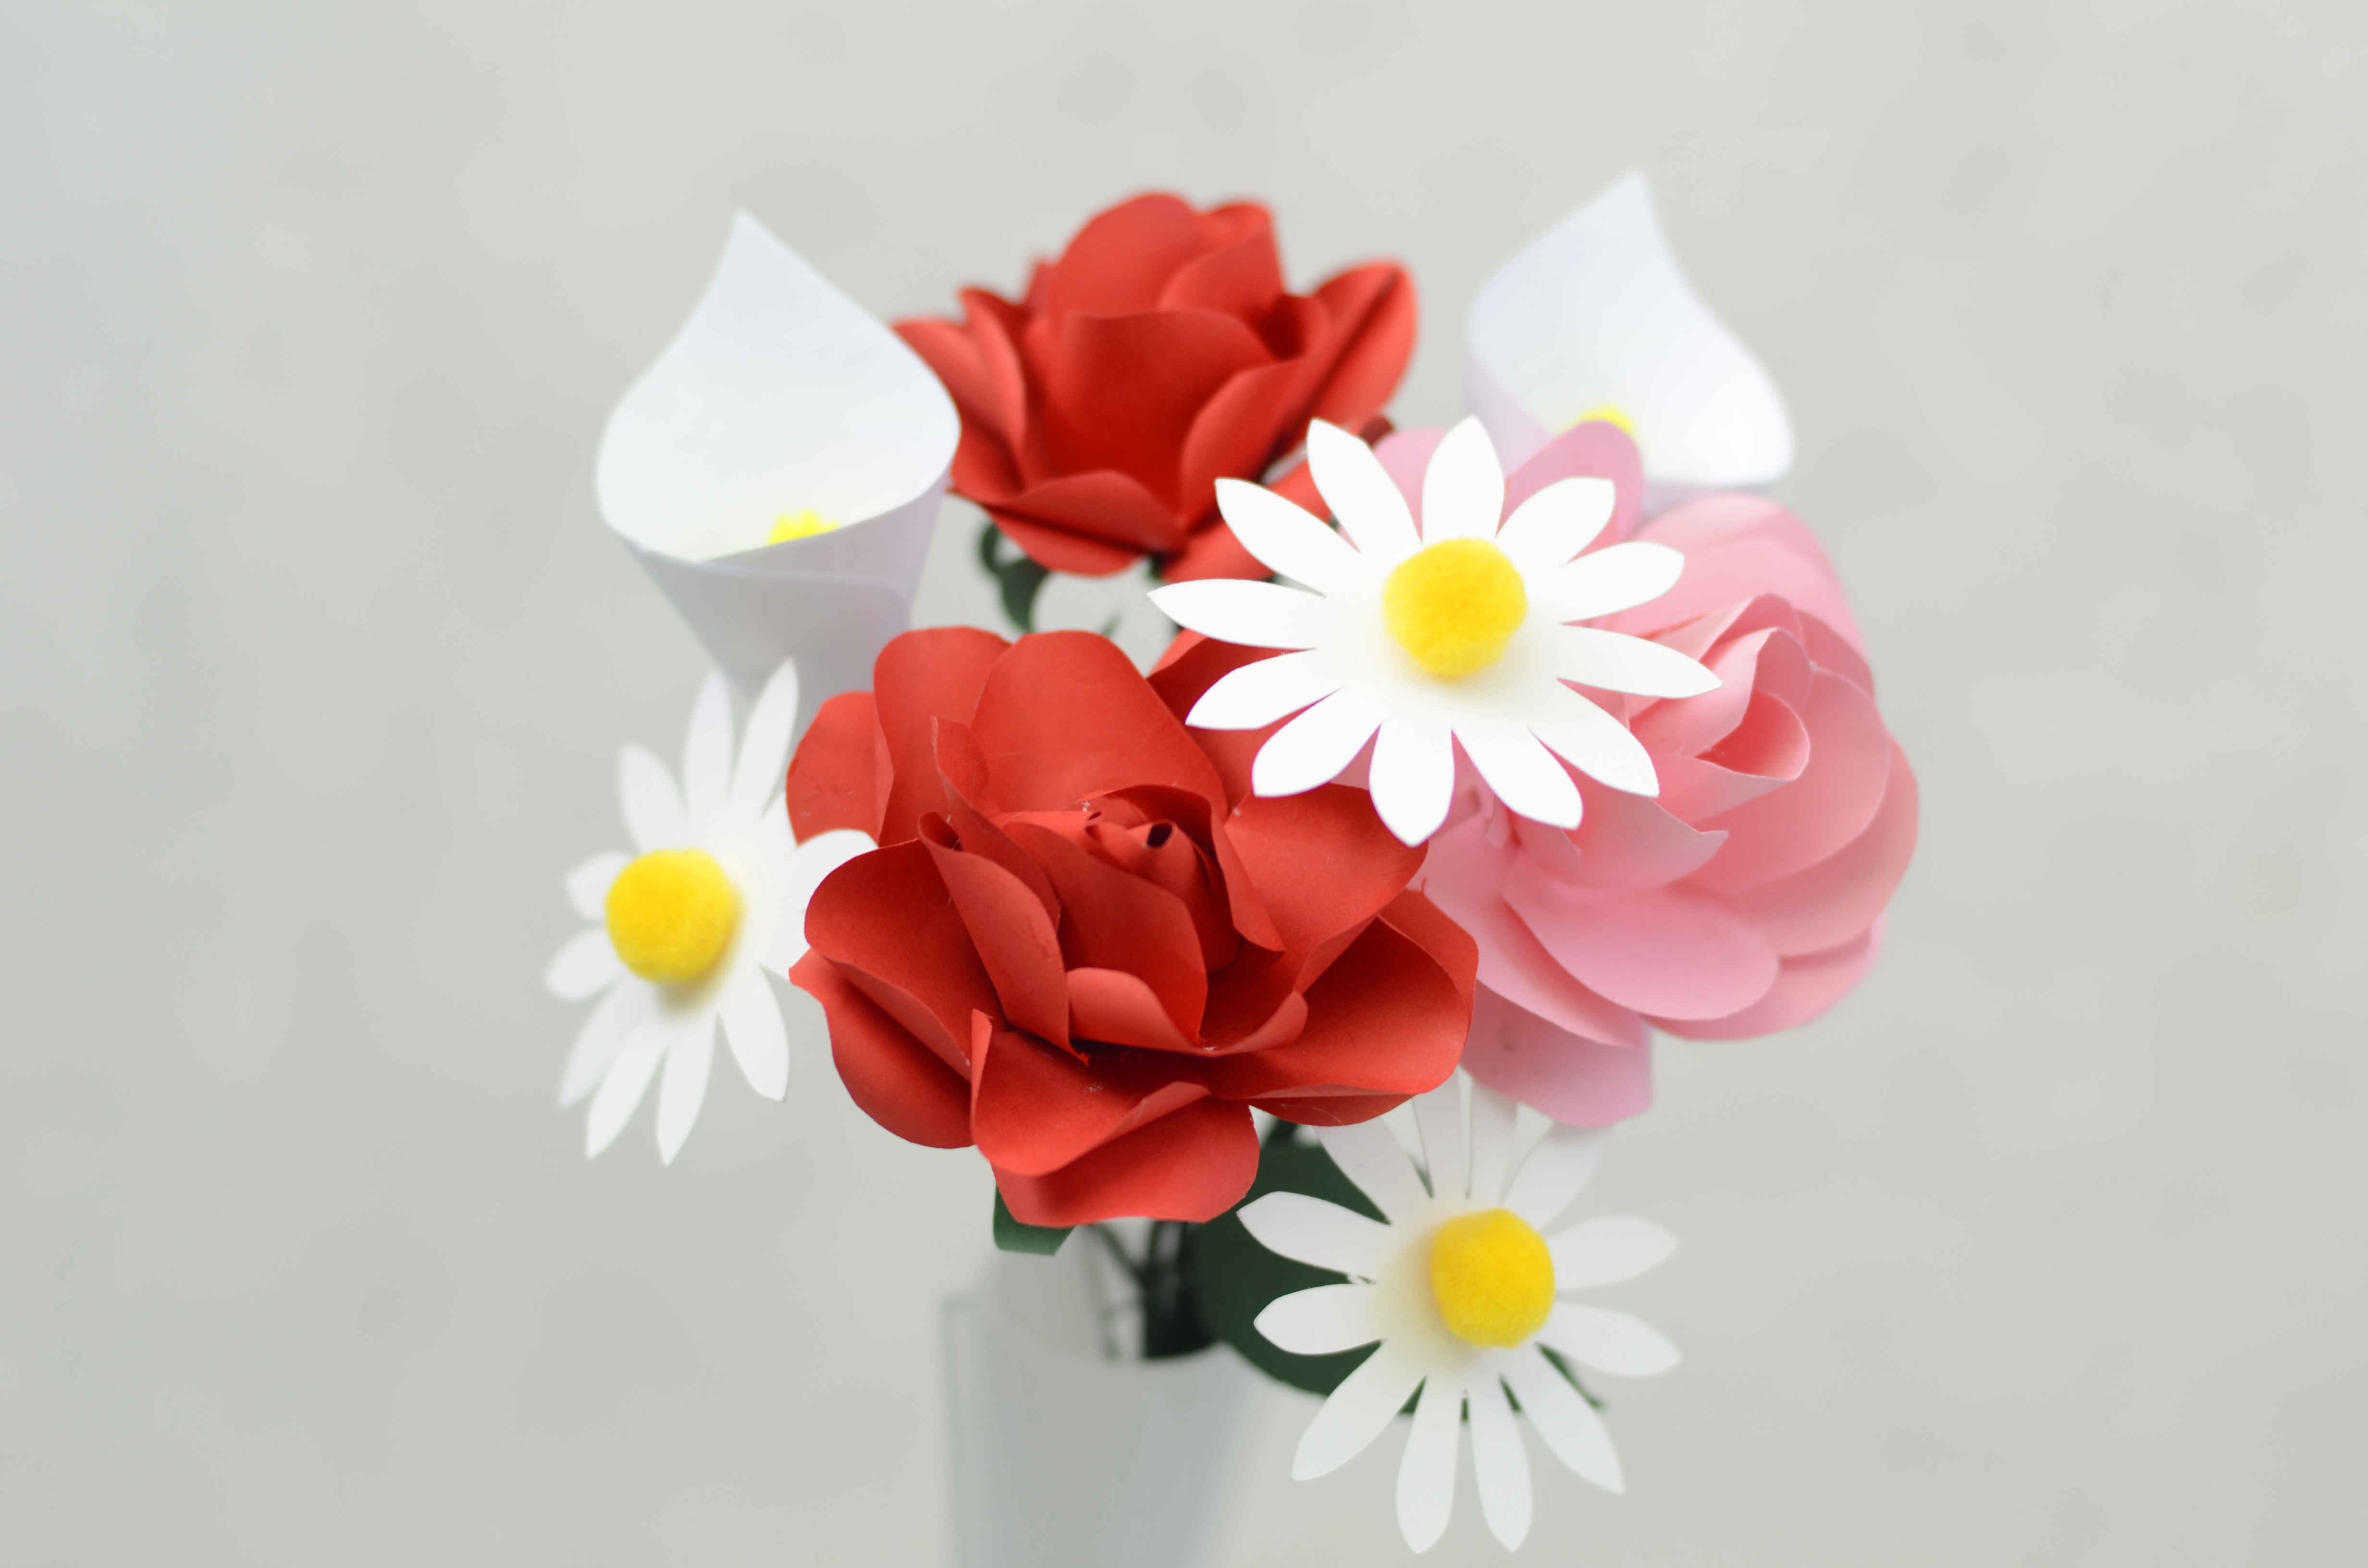 The Complete Guide to Making Paper Flowers - Creative Pop Up Cards